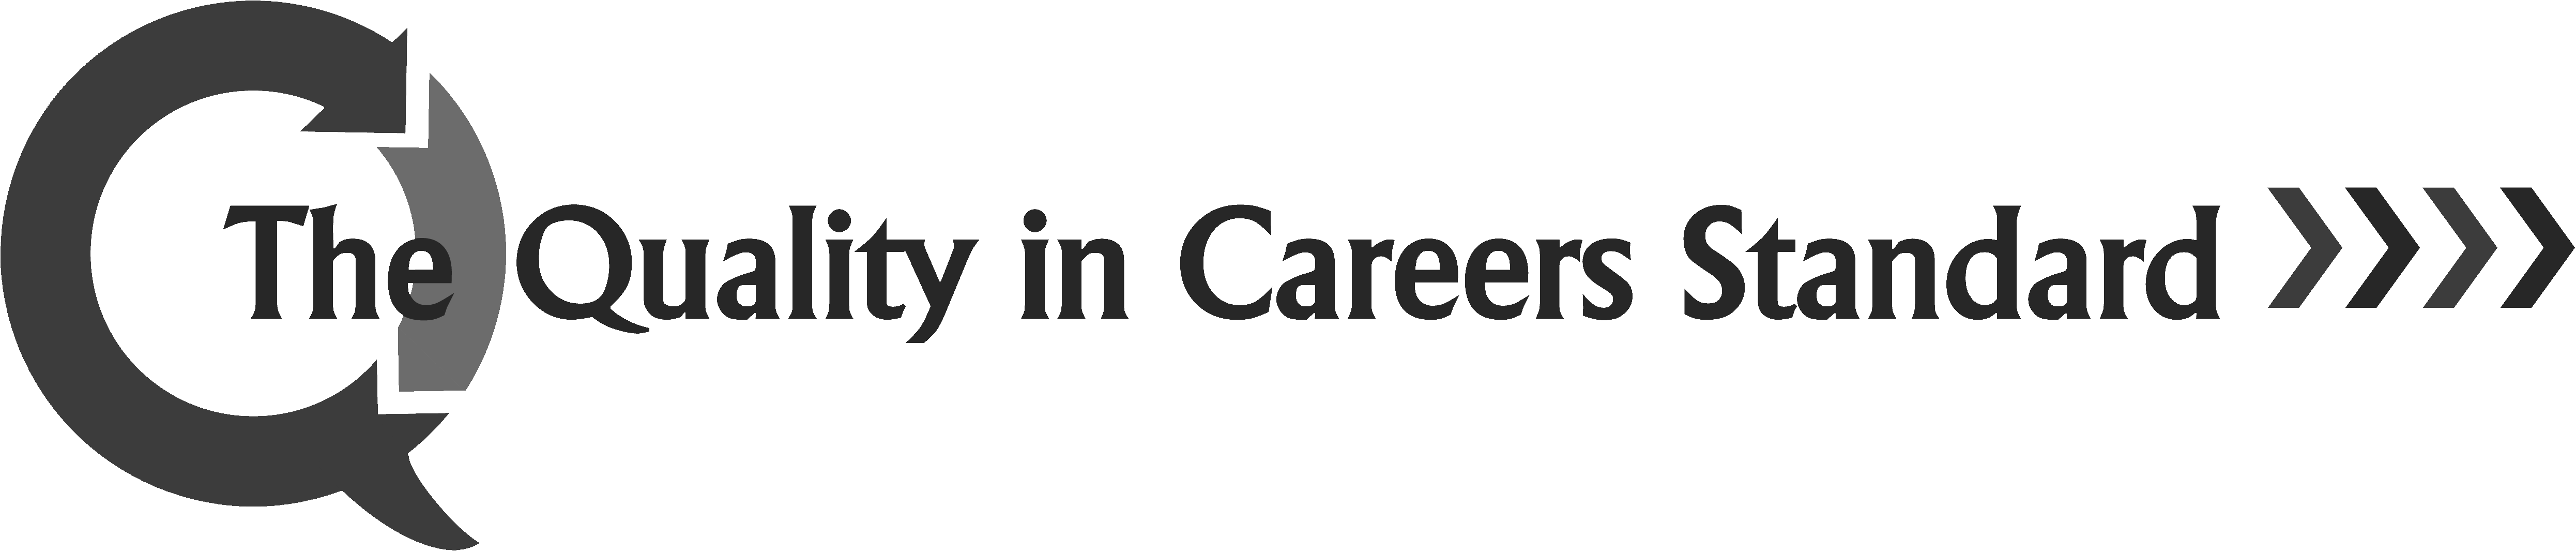 The Quality in Careers Standard Logo